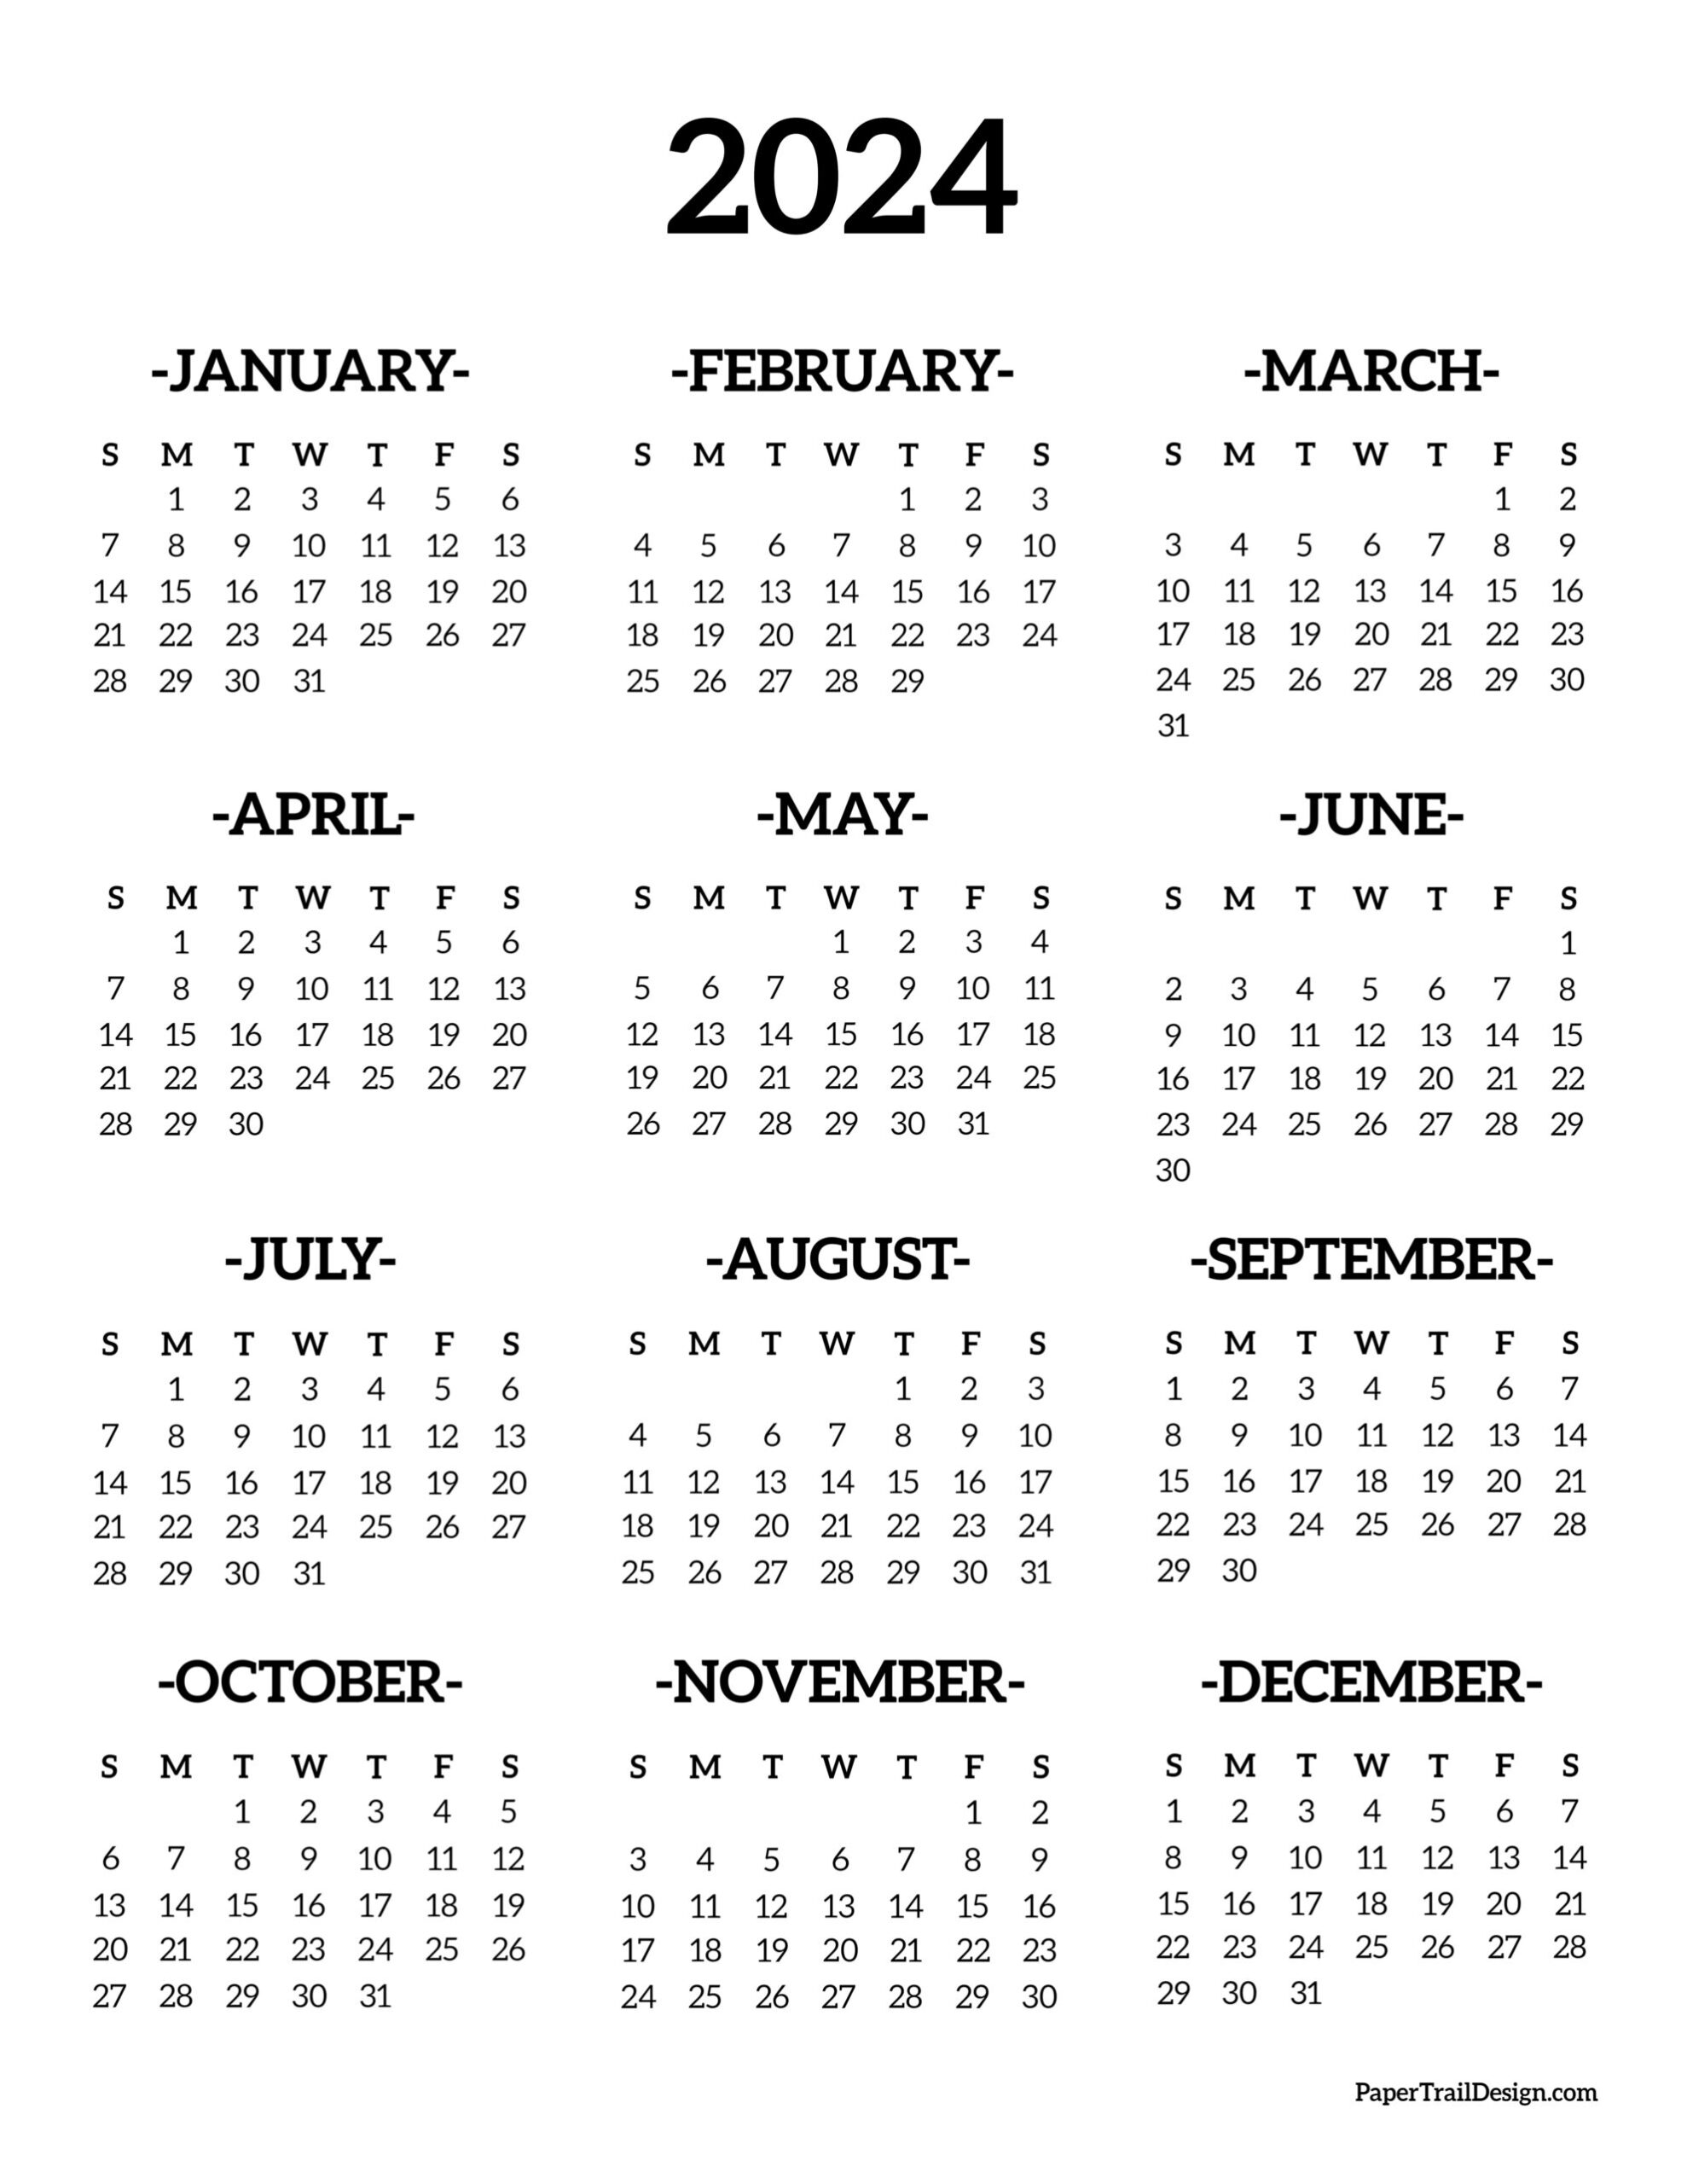 Calendar 2024 Printable One Page - Paper Trail Design for 2024 Printable Calendar Year At A Glance